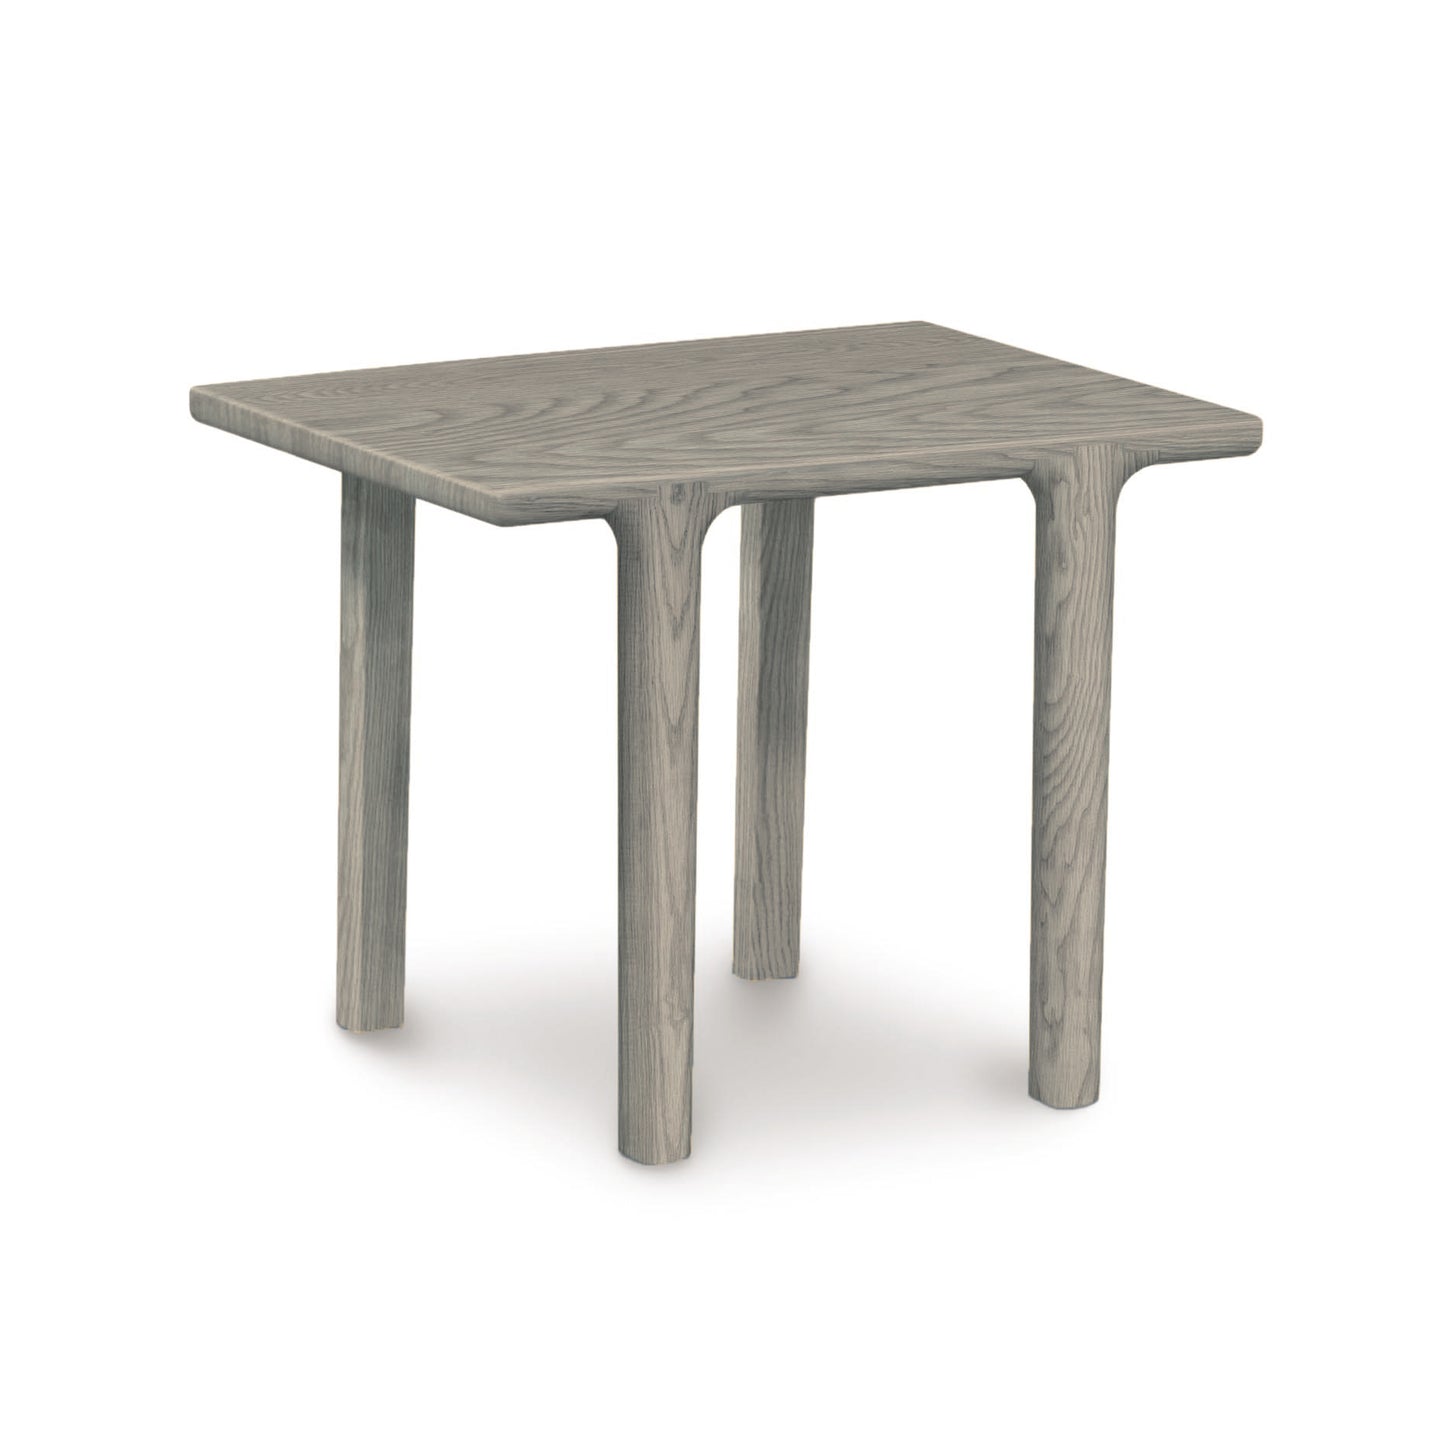 The Copeland Furniture Sierra Rectangular End Table is a modern side table made of grey wood.